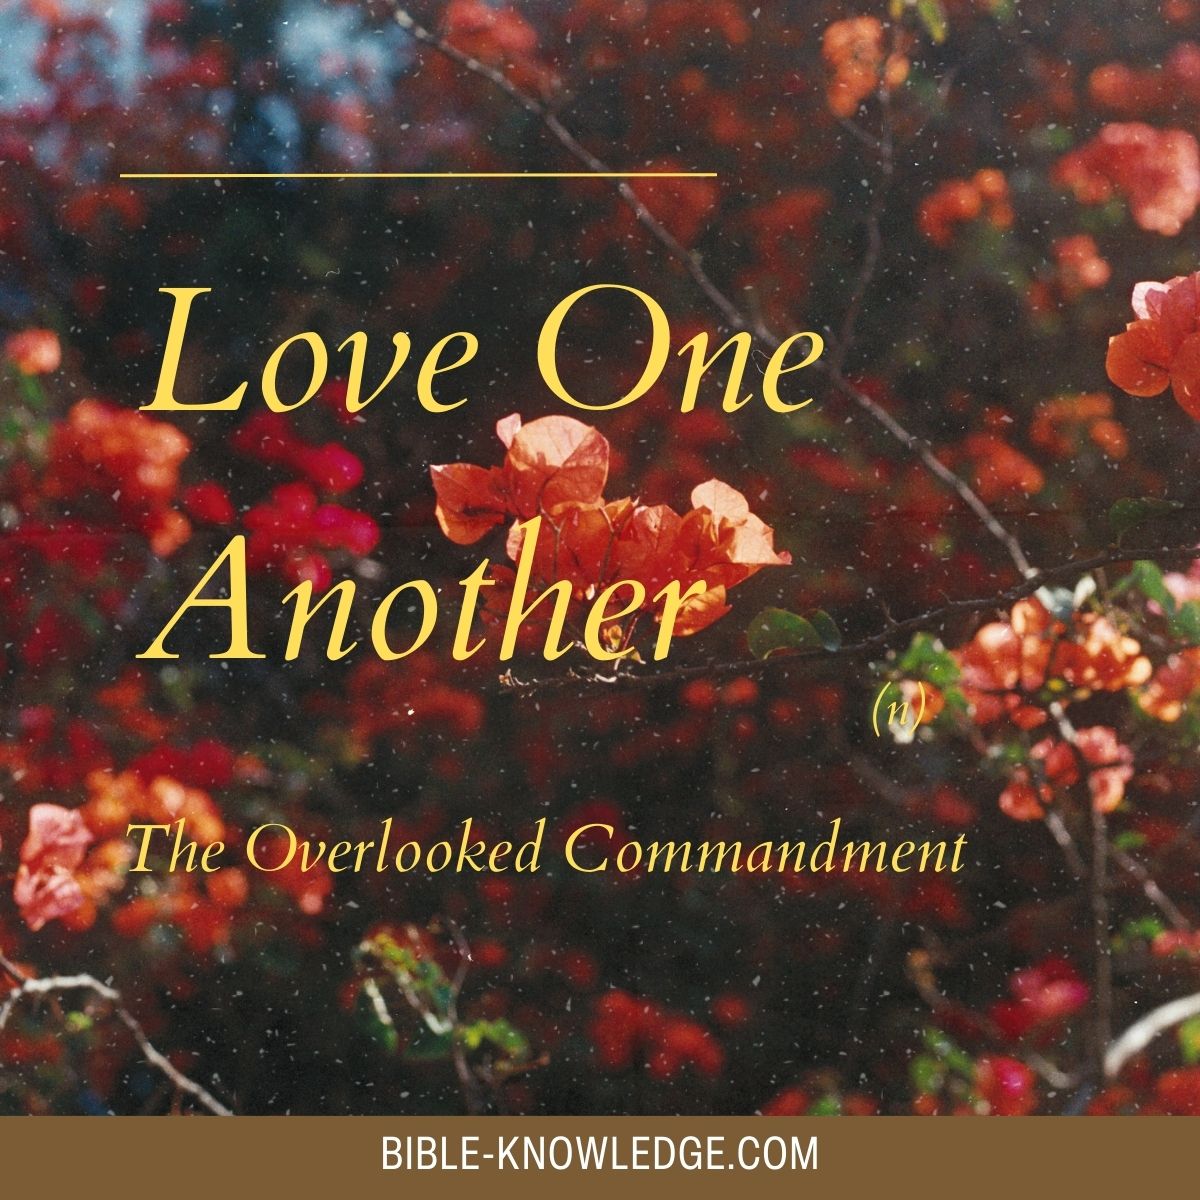 Love One Another – The Overlooked Commandment